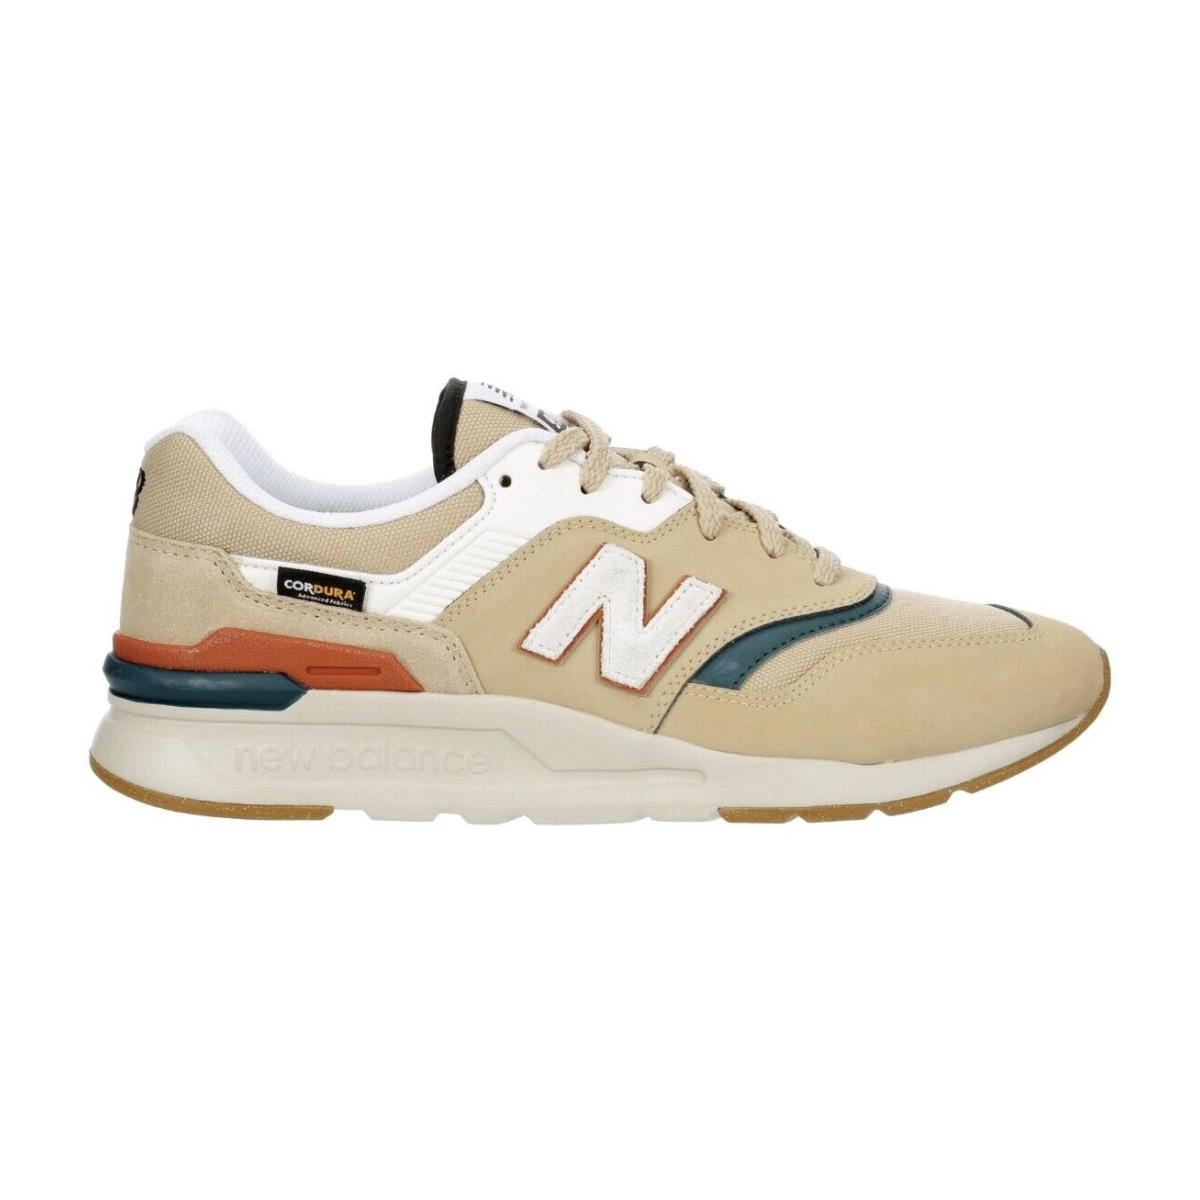 New Balance 997H Cordura Men`s Suede Athletic Running Casual Fashion Shoes OFF-WHITE/Sand